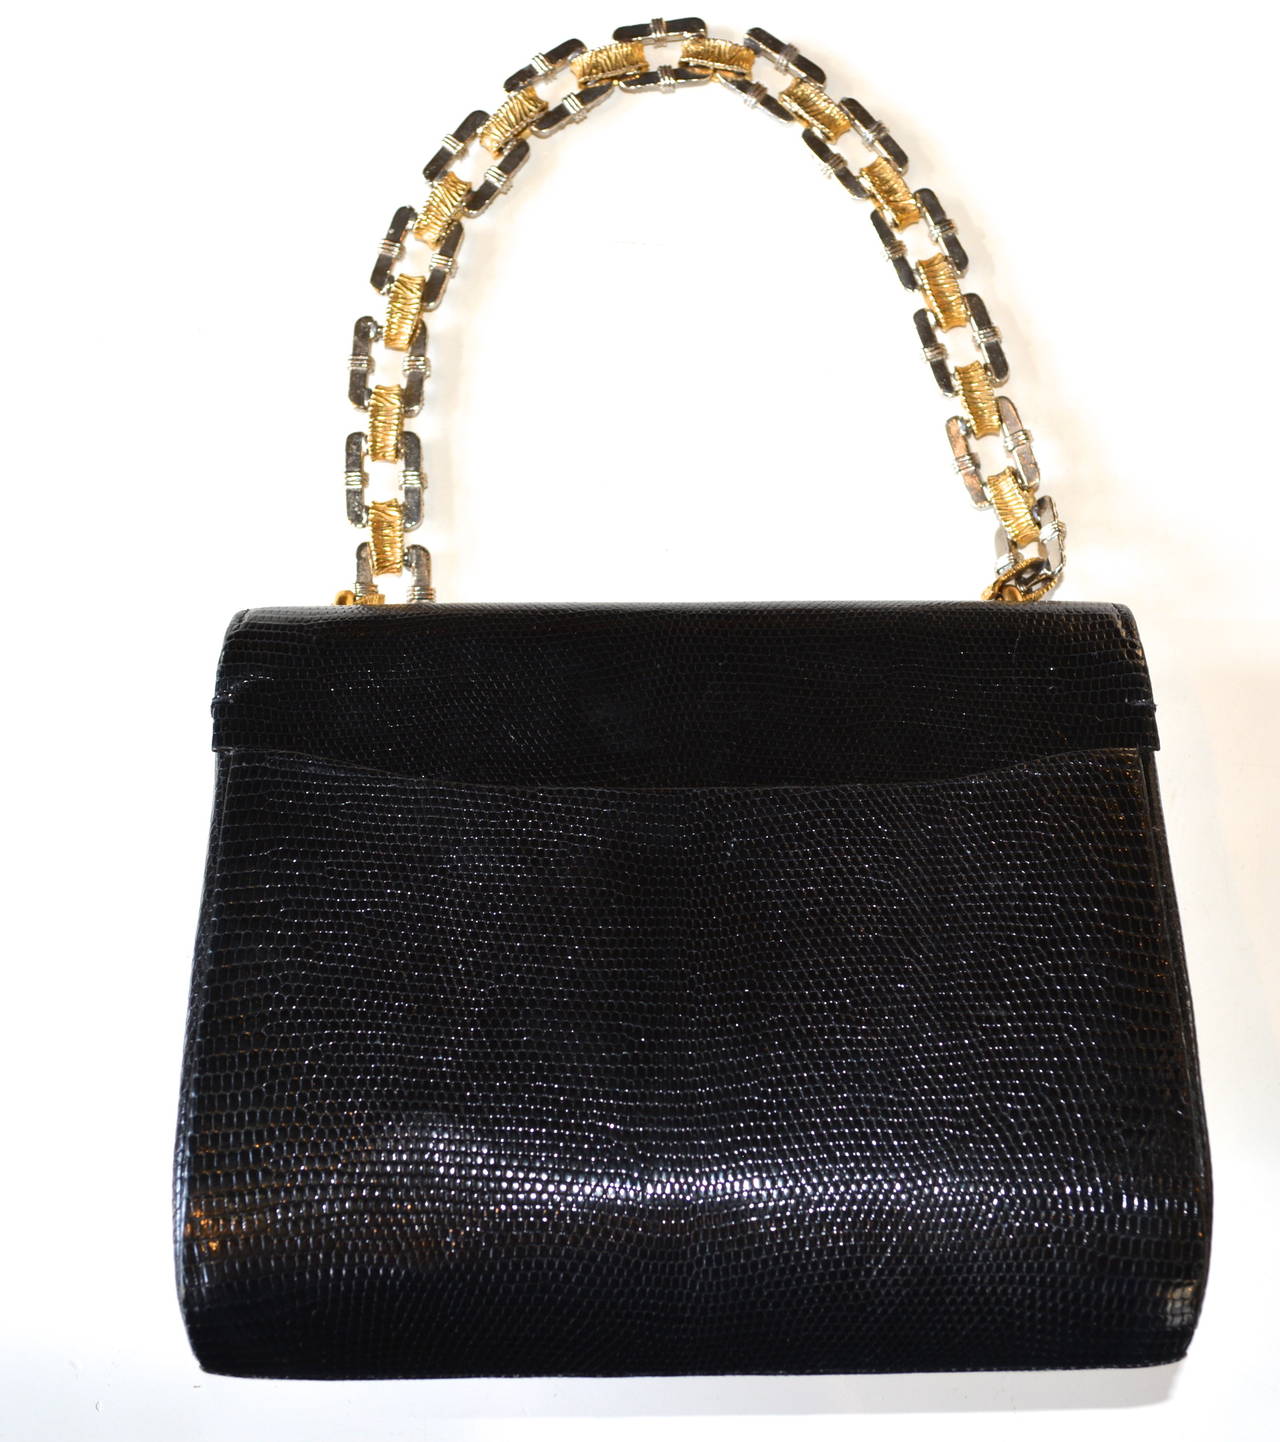 Mid century exotic leather- I believe it is lizard skin, Cerny Paris bejeweled bag. Quality construction and fine detailing, signed. This bag is in fabulous condition kept in the same family since it was purchased.  The paste stone and golden metal